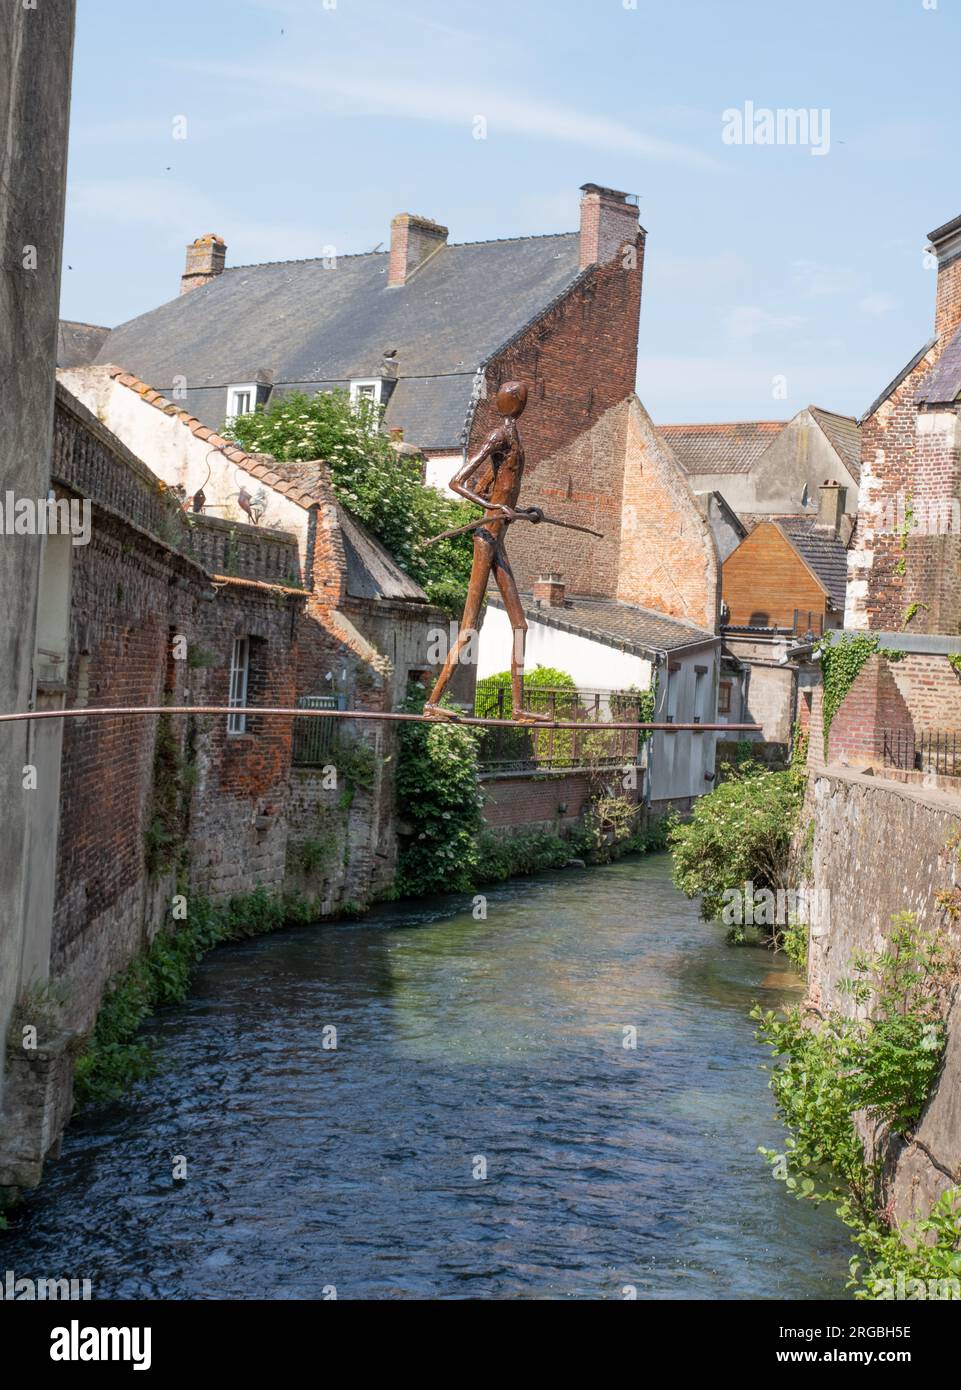 Tightrope walker metal sculpture over the river Canche in Hesdin Stock Photo